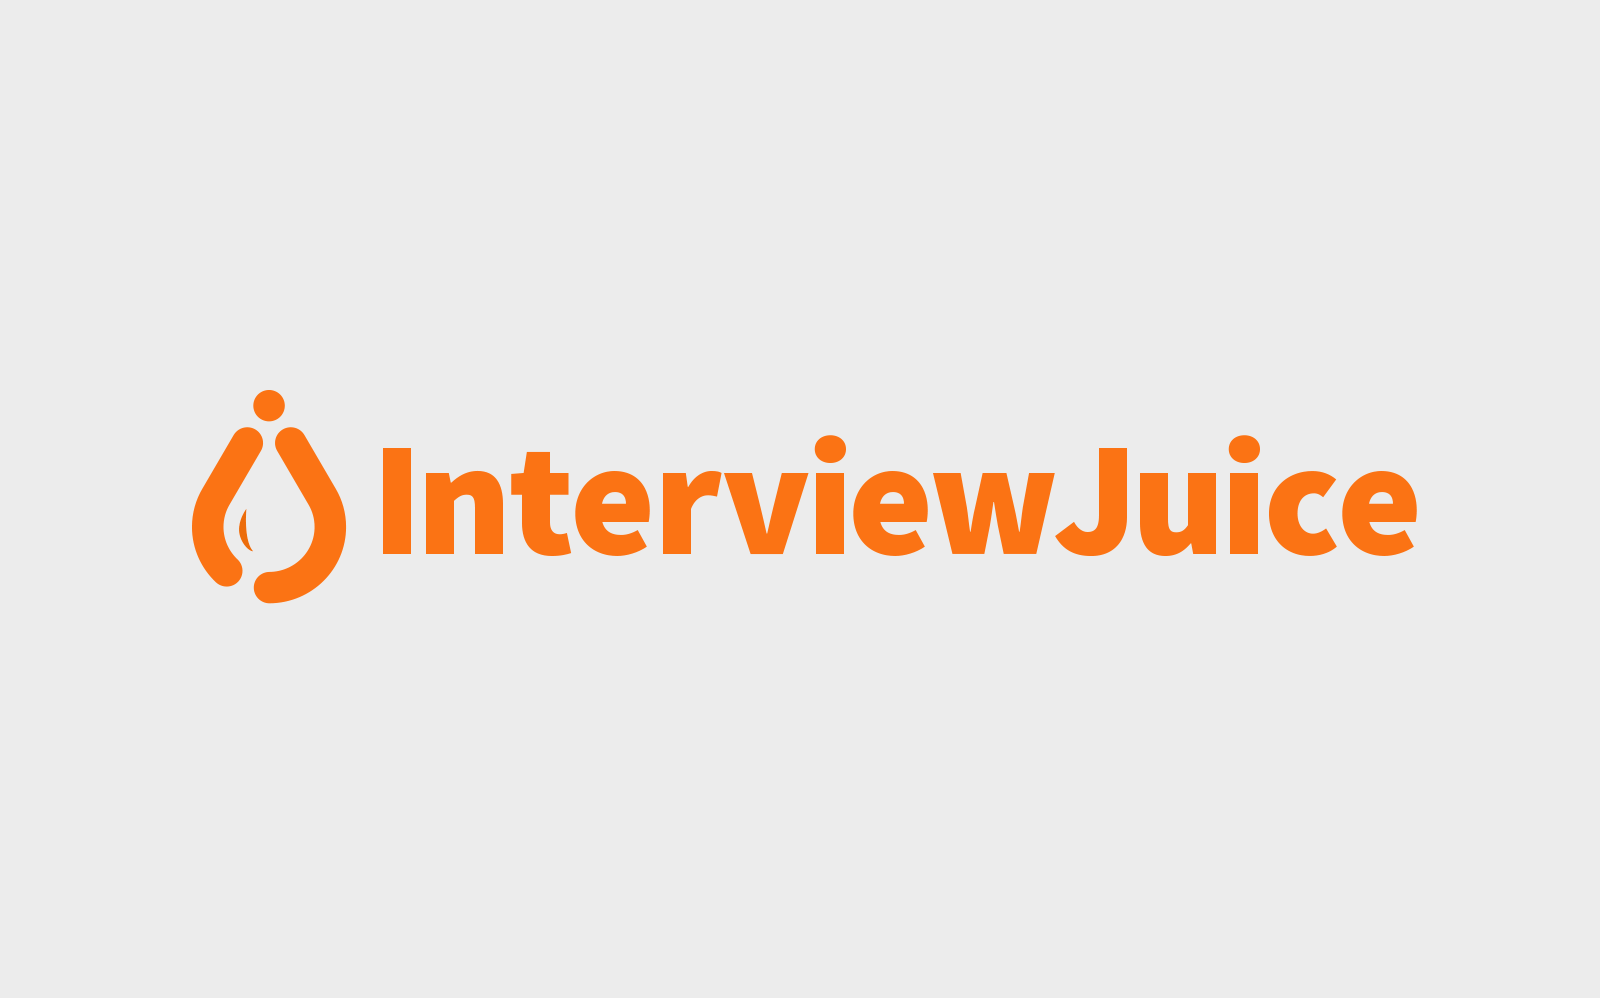 Interview Juice small business logo design